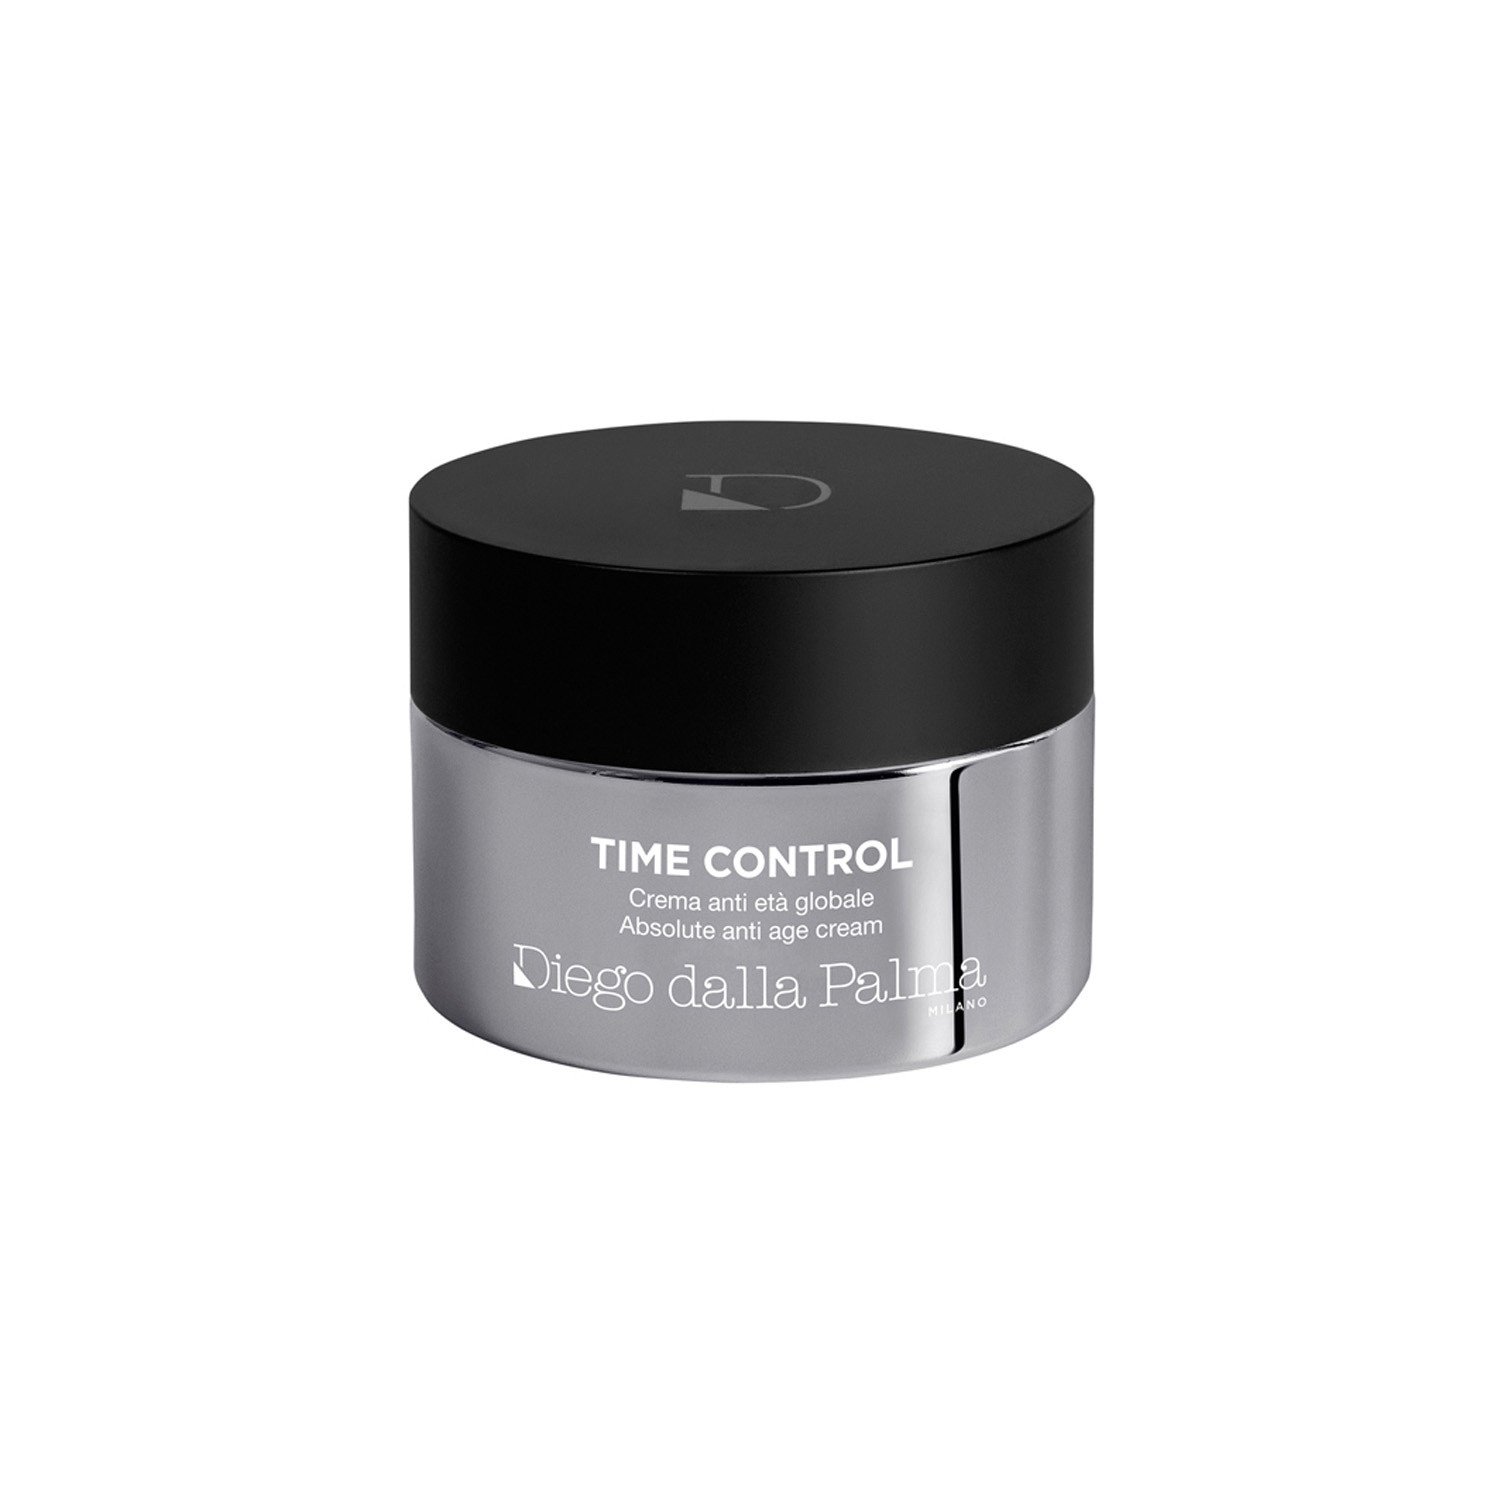 TIME CONTROL - Absolute Anti Age Cream, Grey, large image number 0